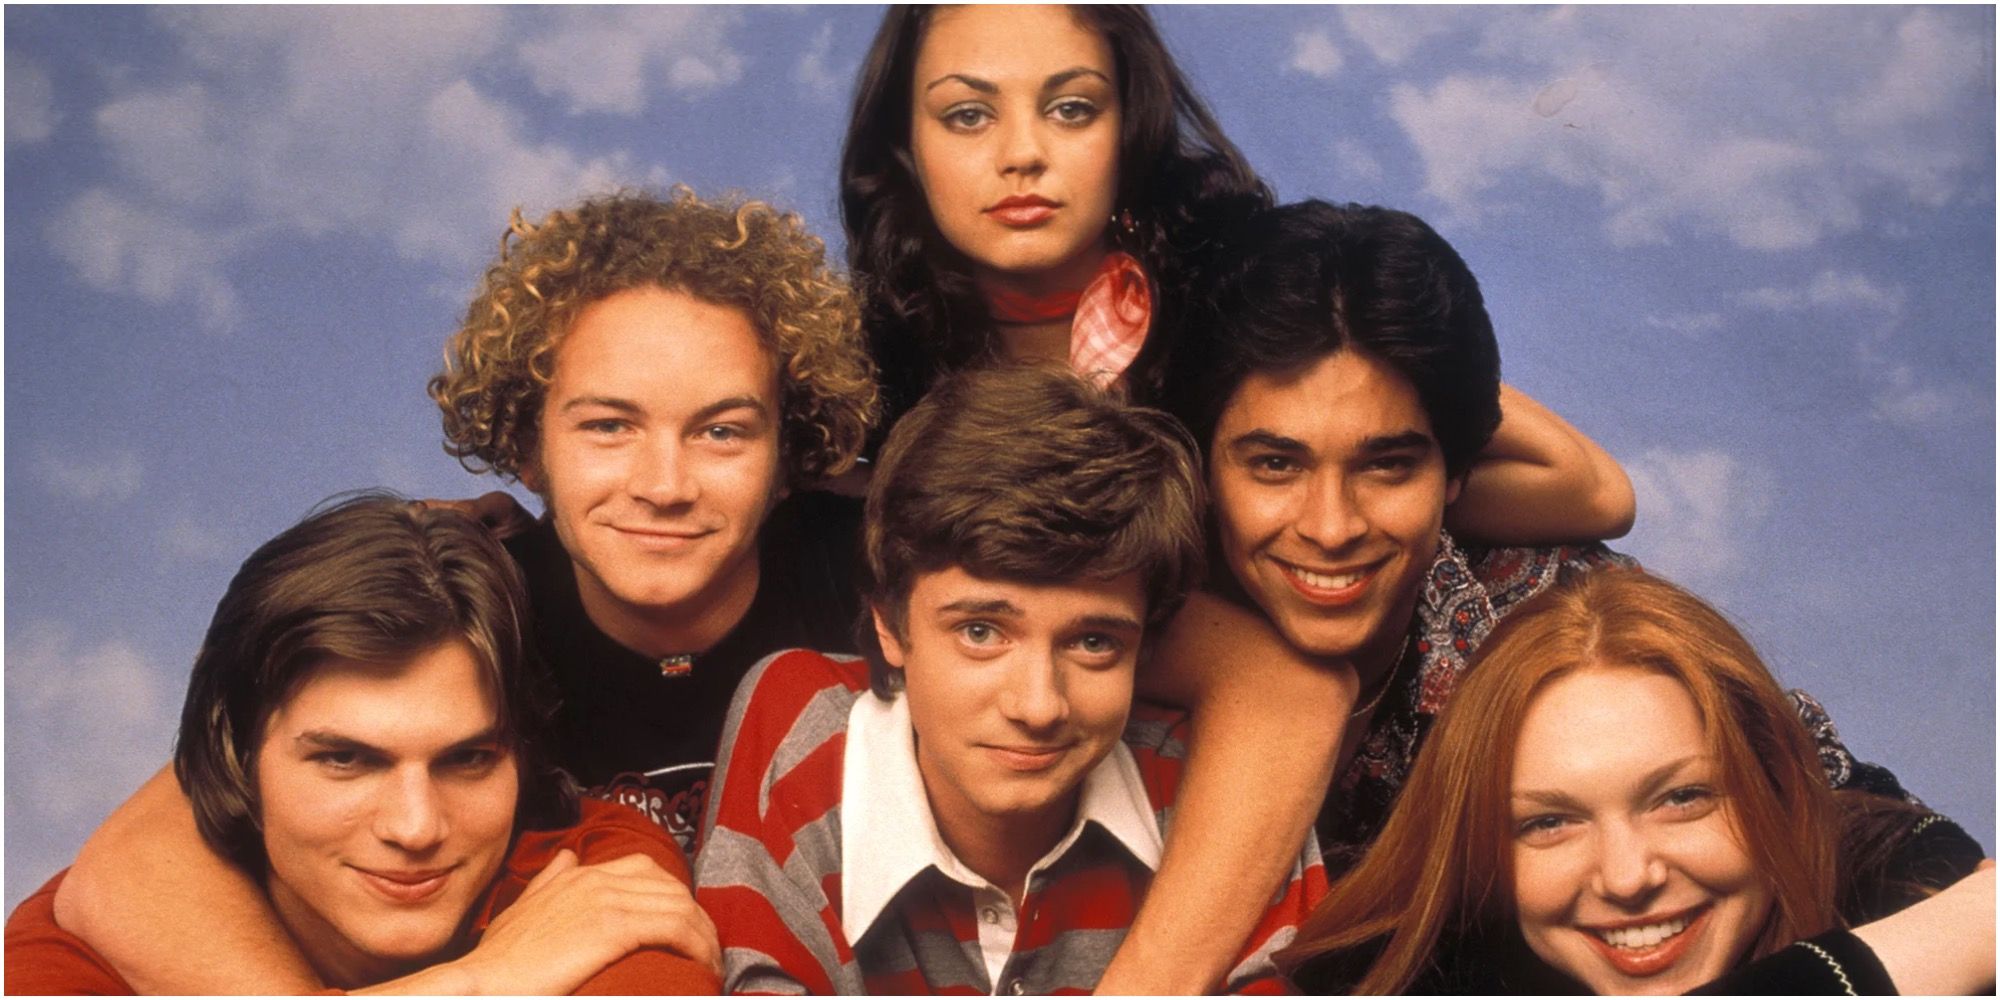 That 70s' Show Cast Members Photo